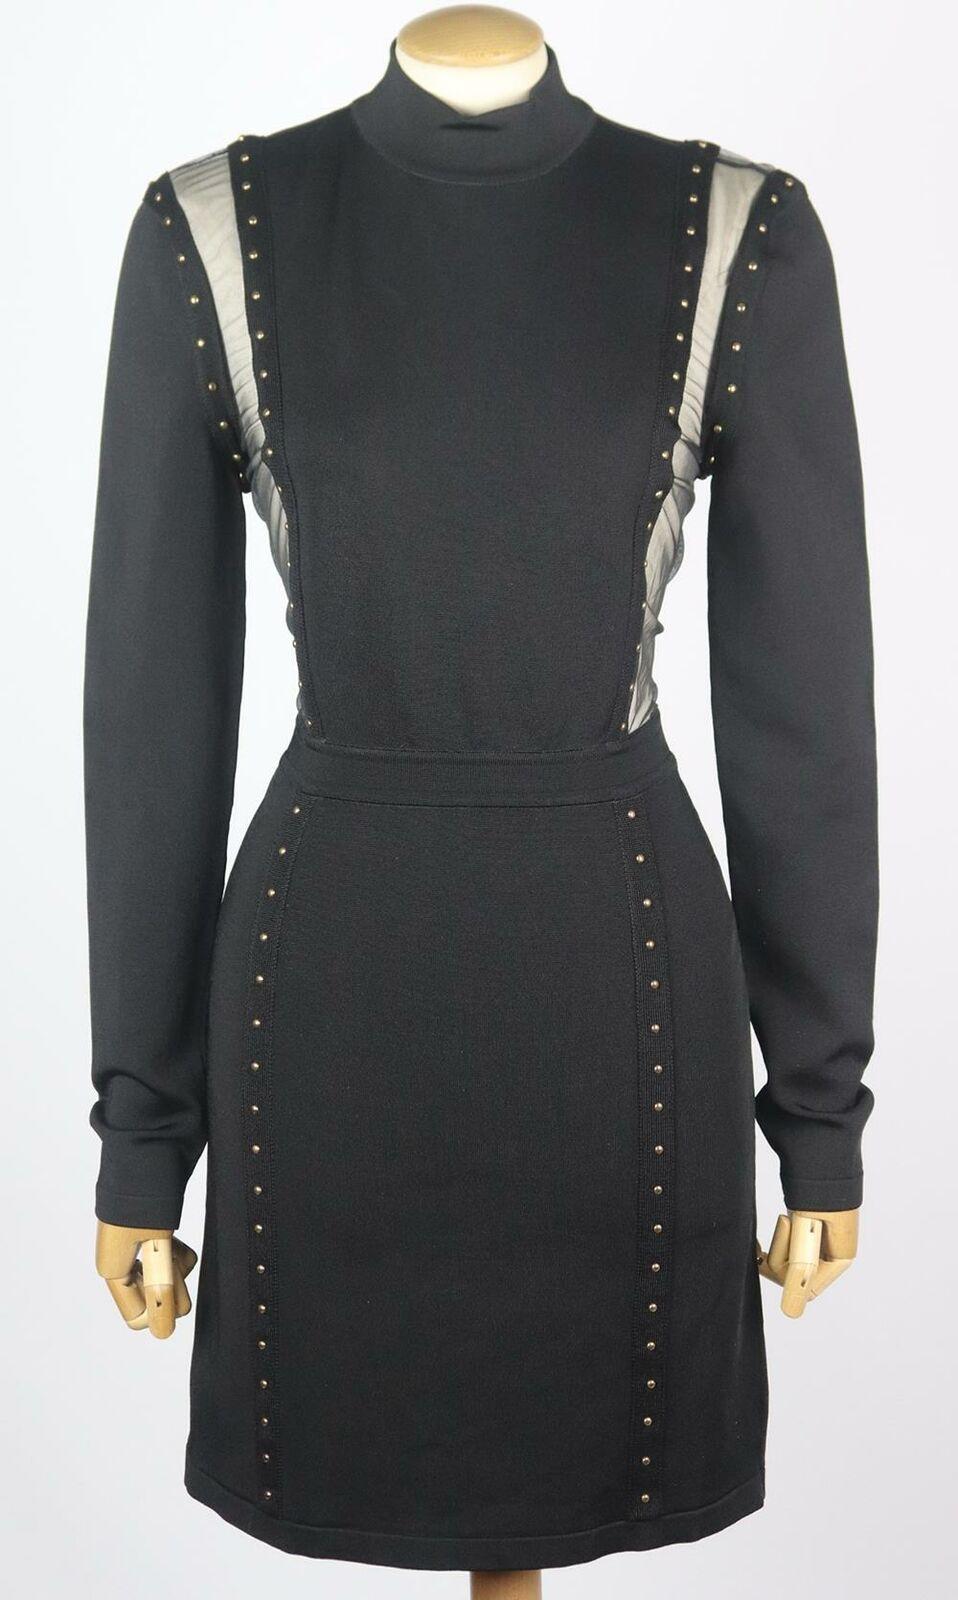 This Balmain dress has been crafted from stretch-knit and is designed with antiqued-gold tone studded detail tracing the sheer mesh panels down each side of your body, it fits for a slim silhouette.
Black stretch-knit.
Zip fastening at back.
91%